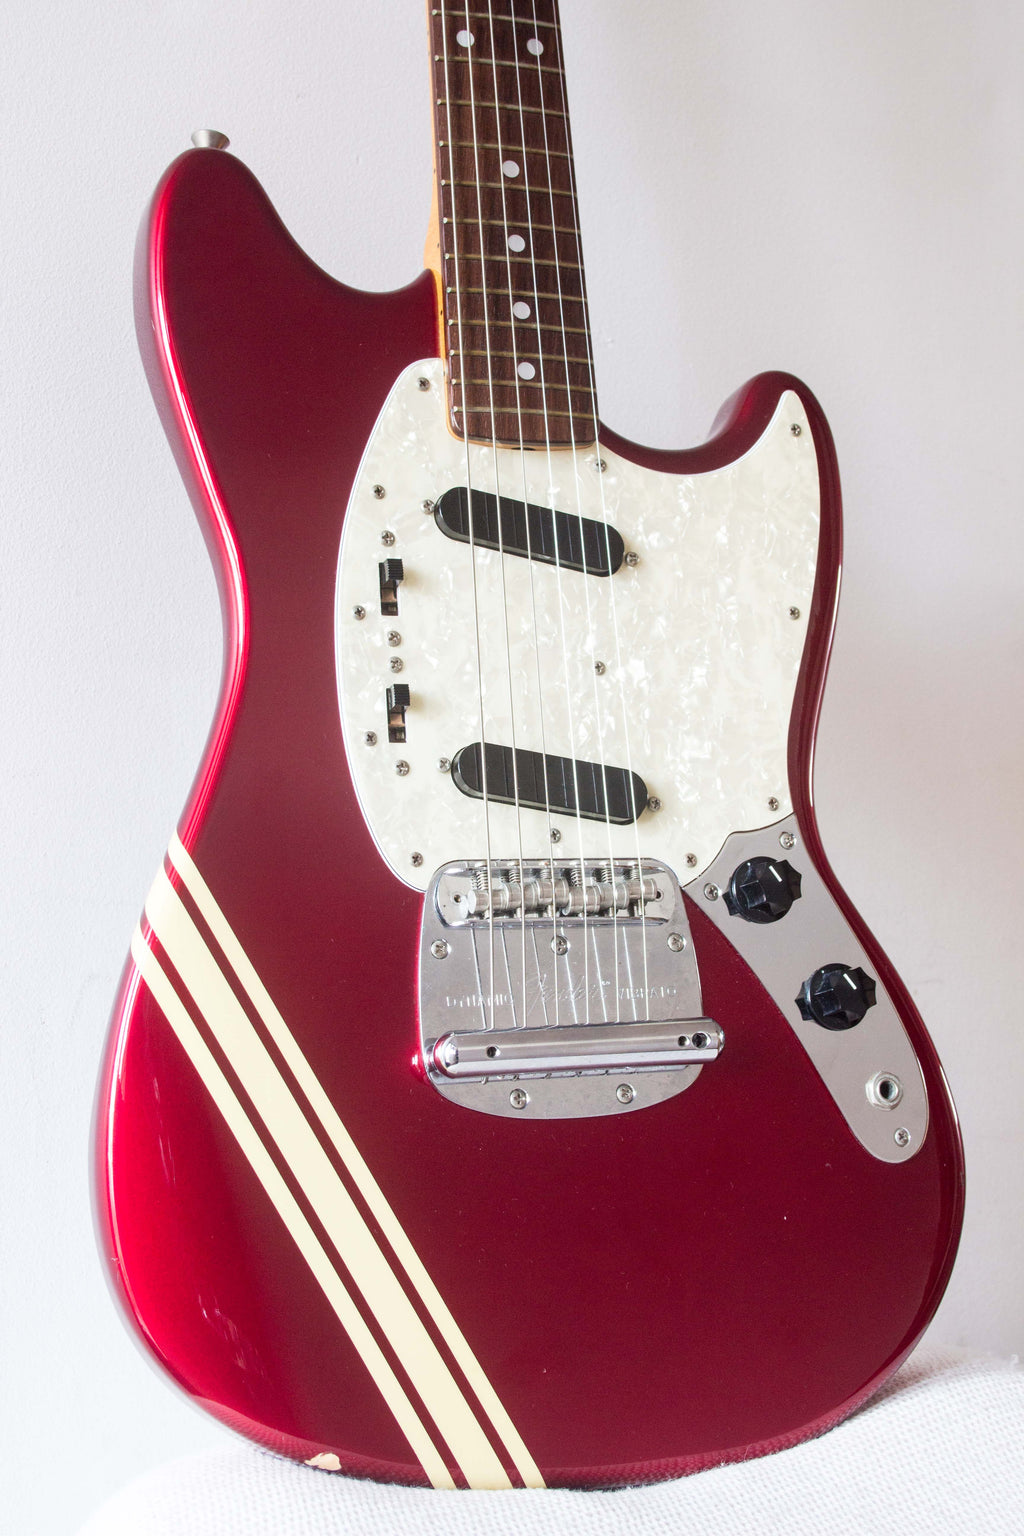 Fender '73 Reissue Competition Mustang MG73-CO Old Candy Apple Red 2007-10